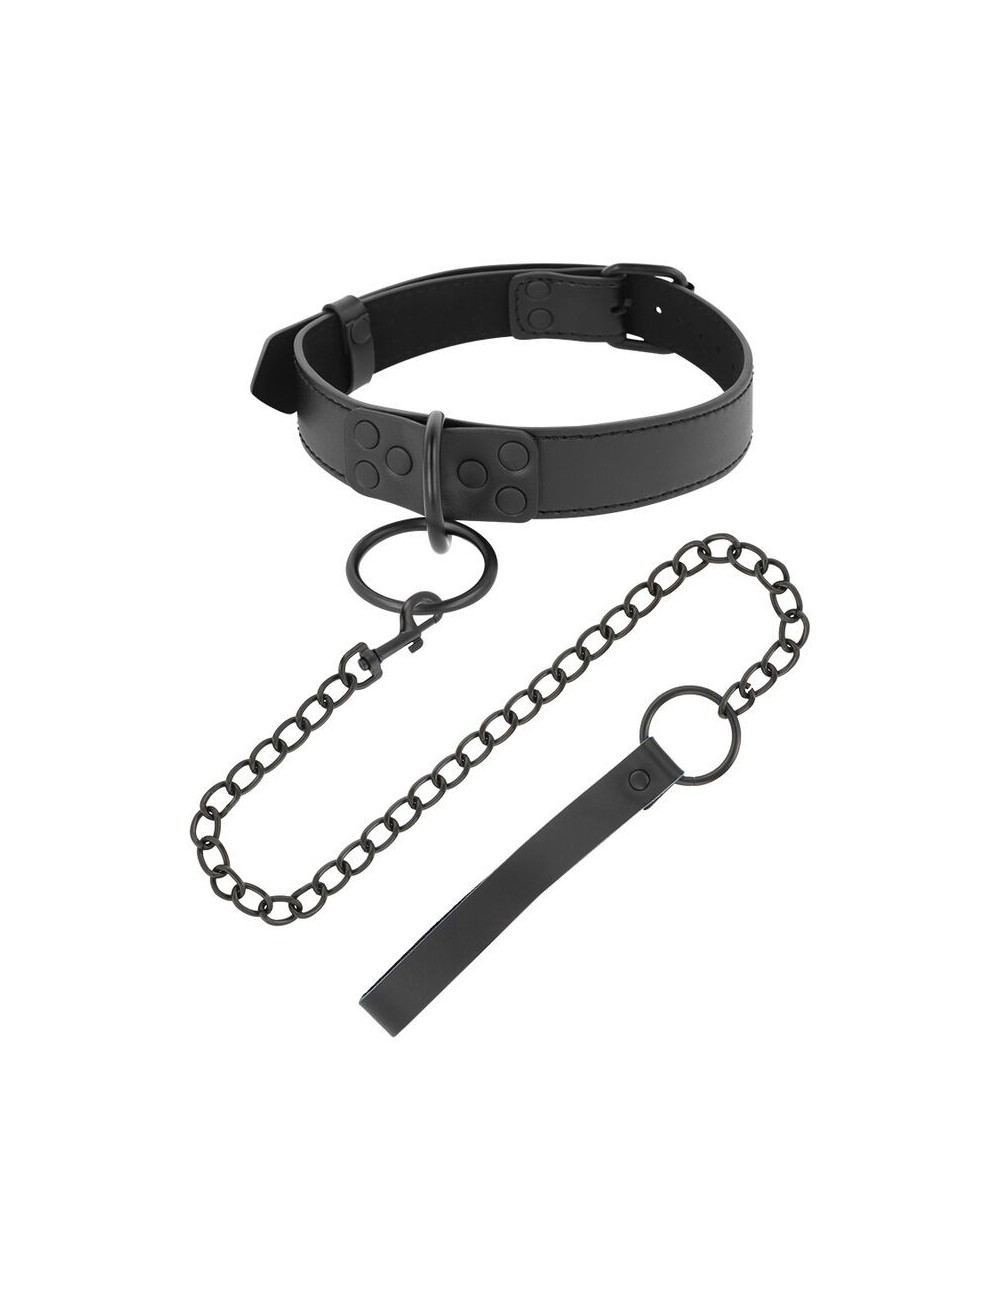 Sextoys - Menottes & accessoires - DARKNESS THIN BLACK FULL COLLAR WITH LEASH - Darkness Bondage